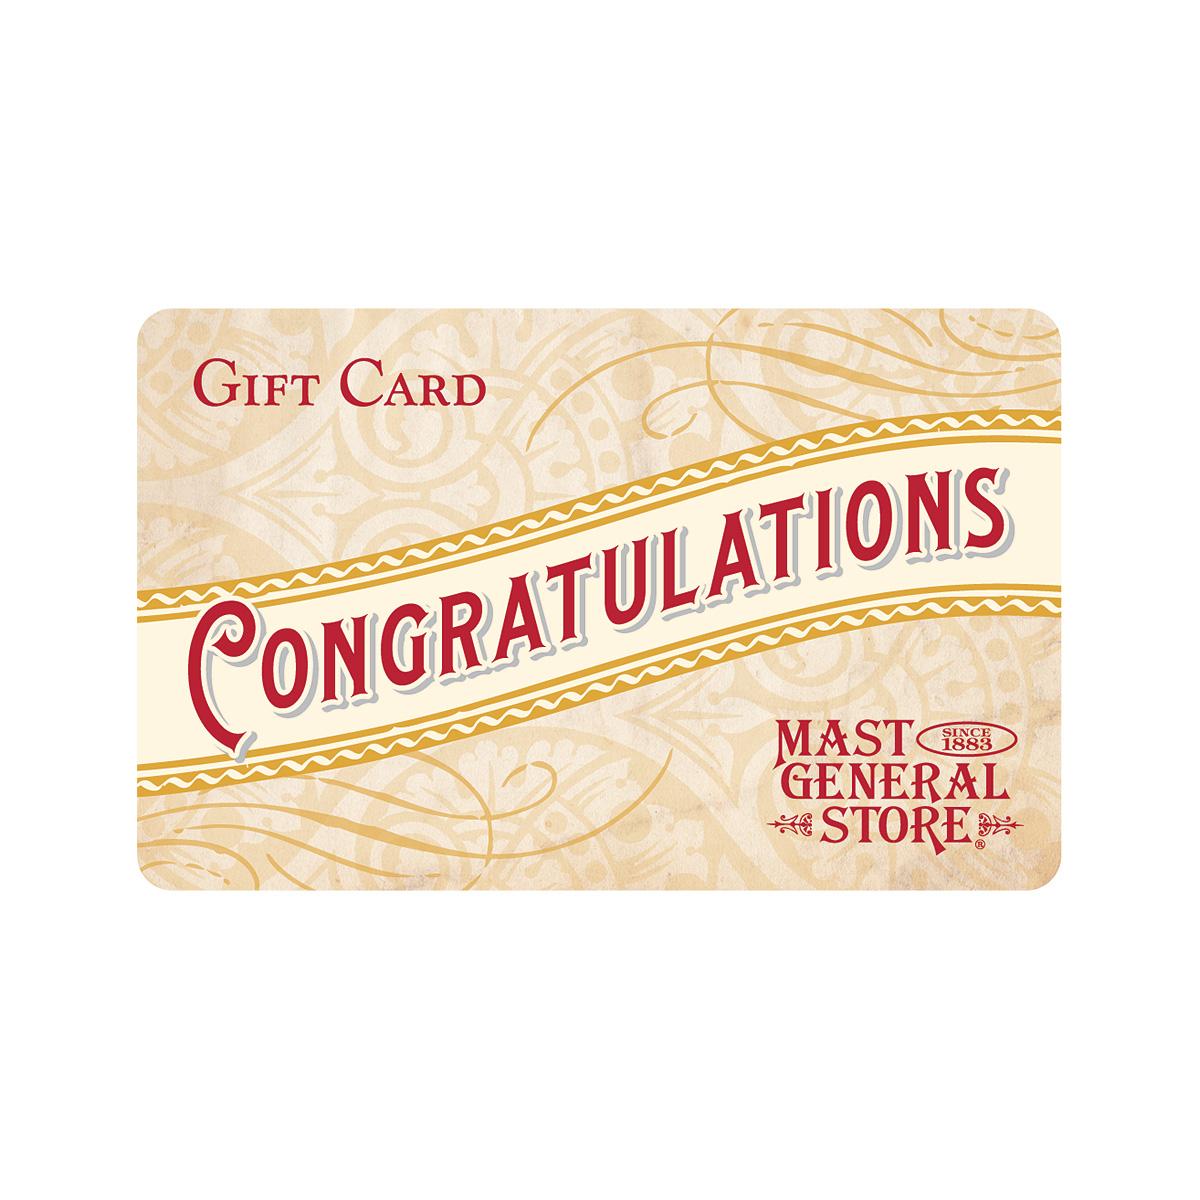  Mast General Store Gift Card